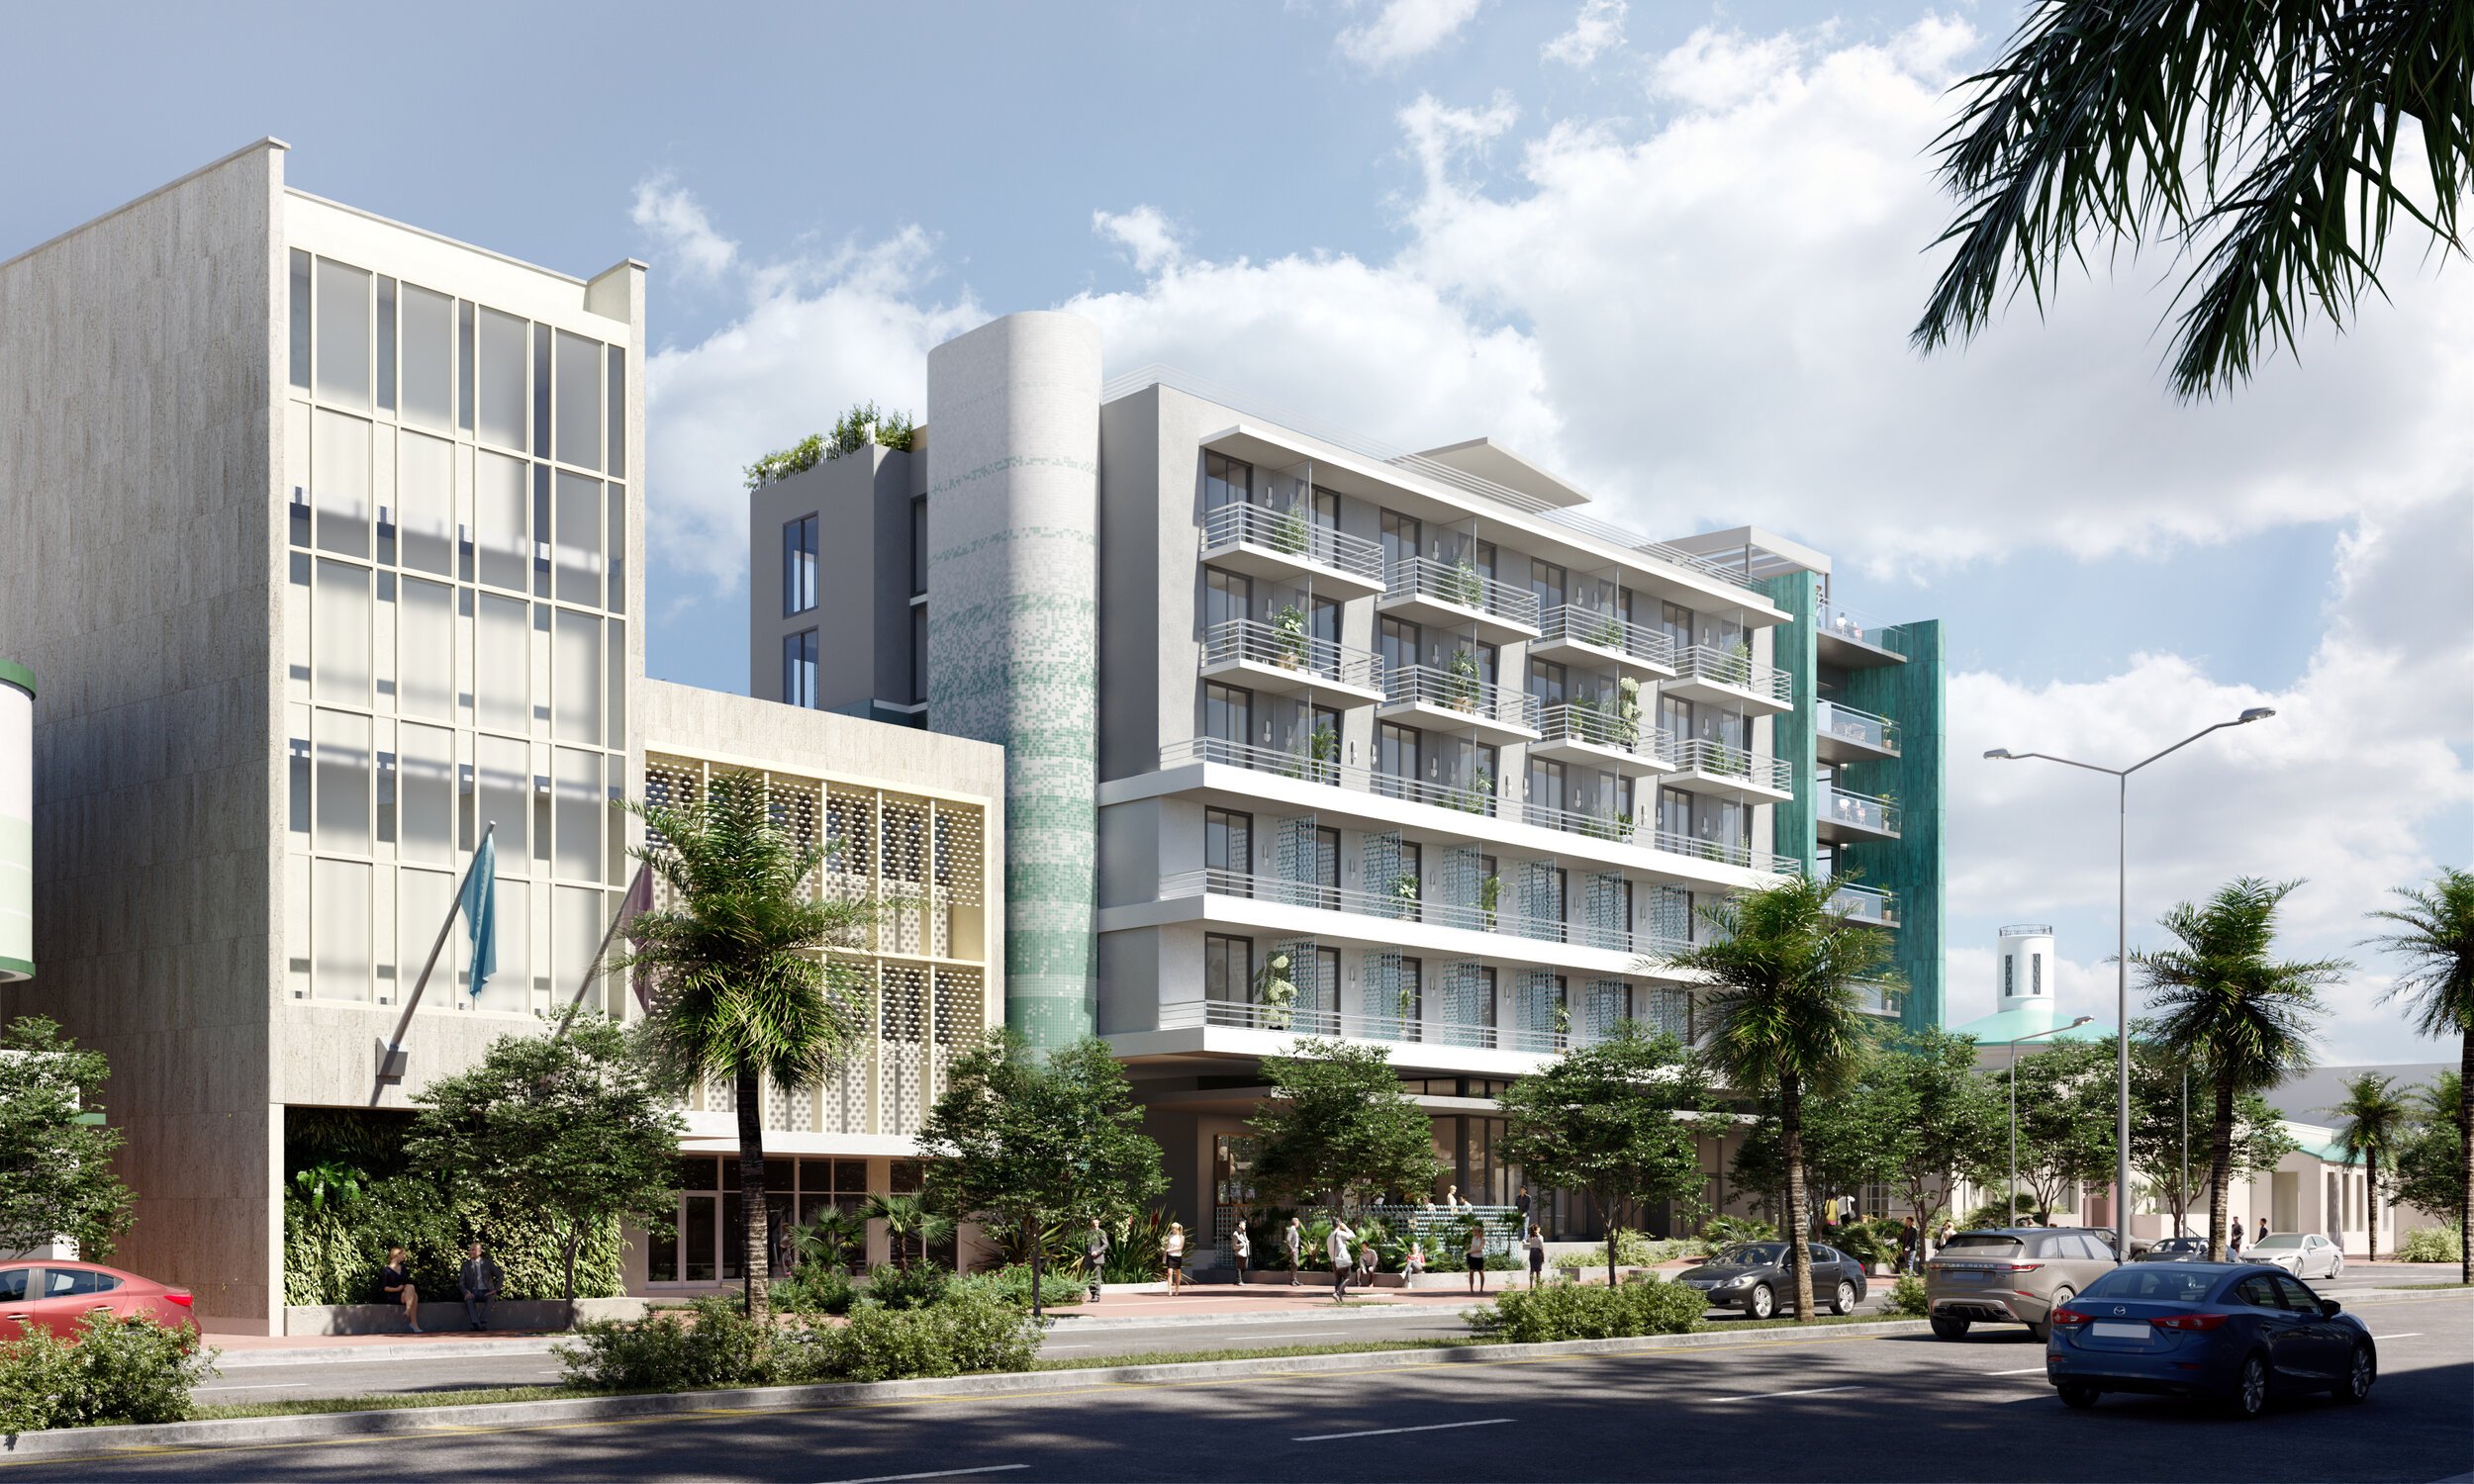 Location Ventures Announces Sellout of URBIN Miami Beach Mixed-Use Condo, Co-Working Lifestyle Project1.jpeg